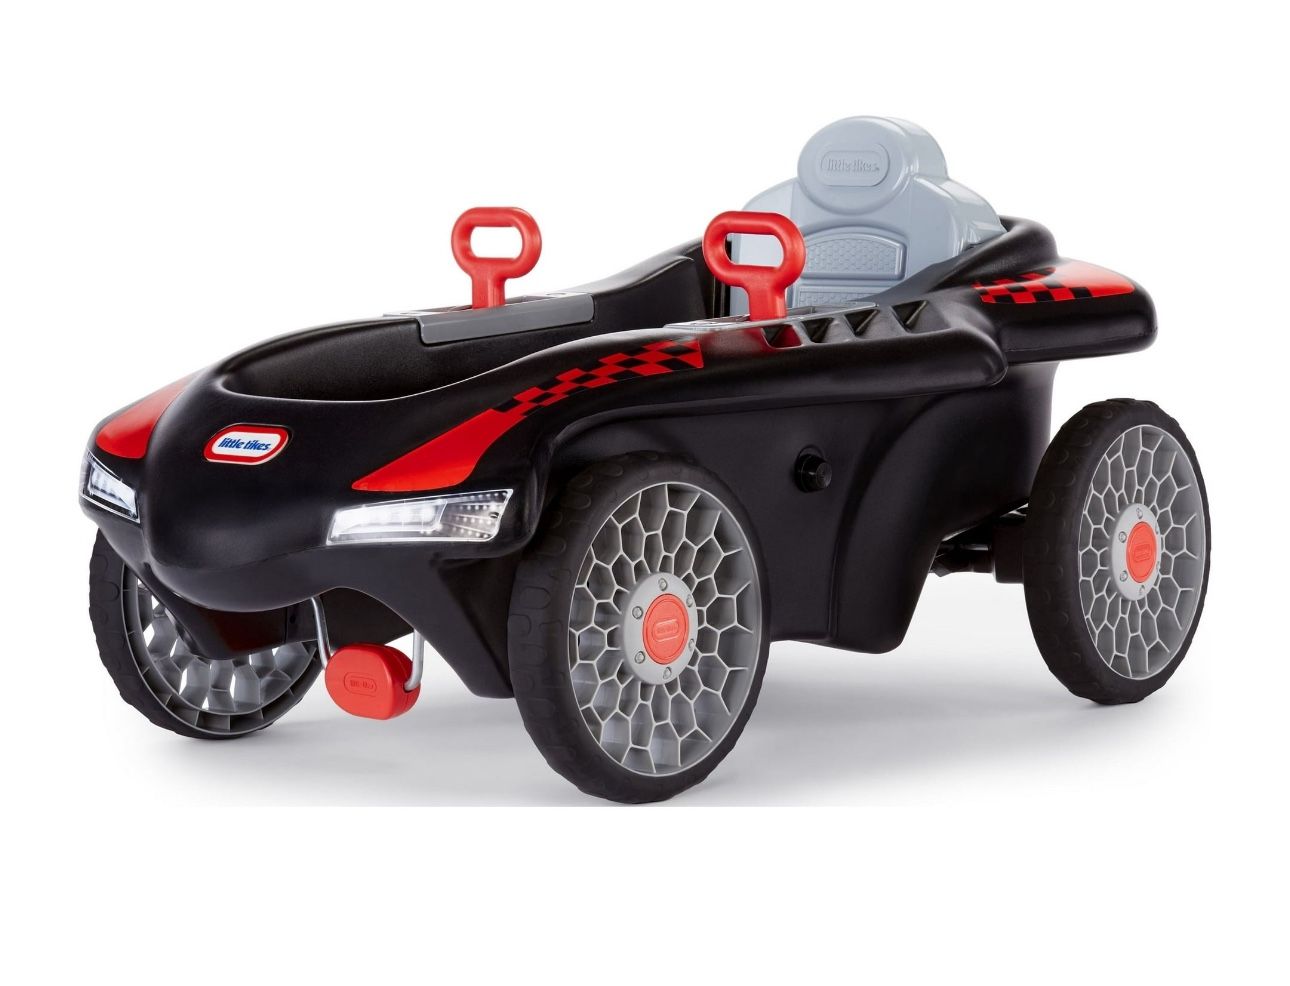 Little Tikes Jett Car Racer Ride-on Pedal Car in Black and Red, Adjustable Seat Back, Dual Handle Rear Wheel Steering - Kids Boys Girls Ages 3 to 7 Ye